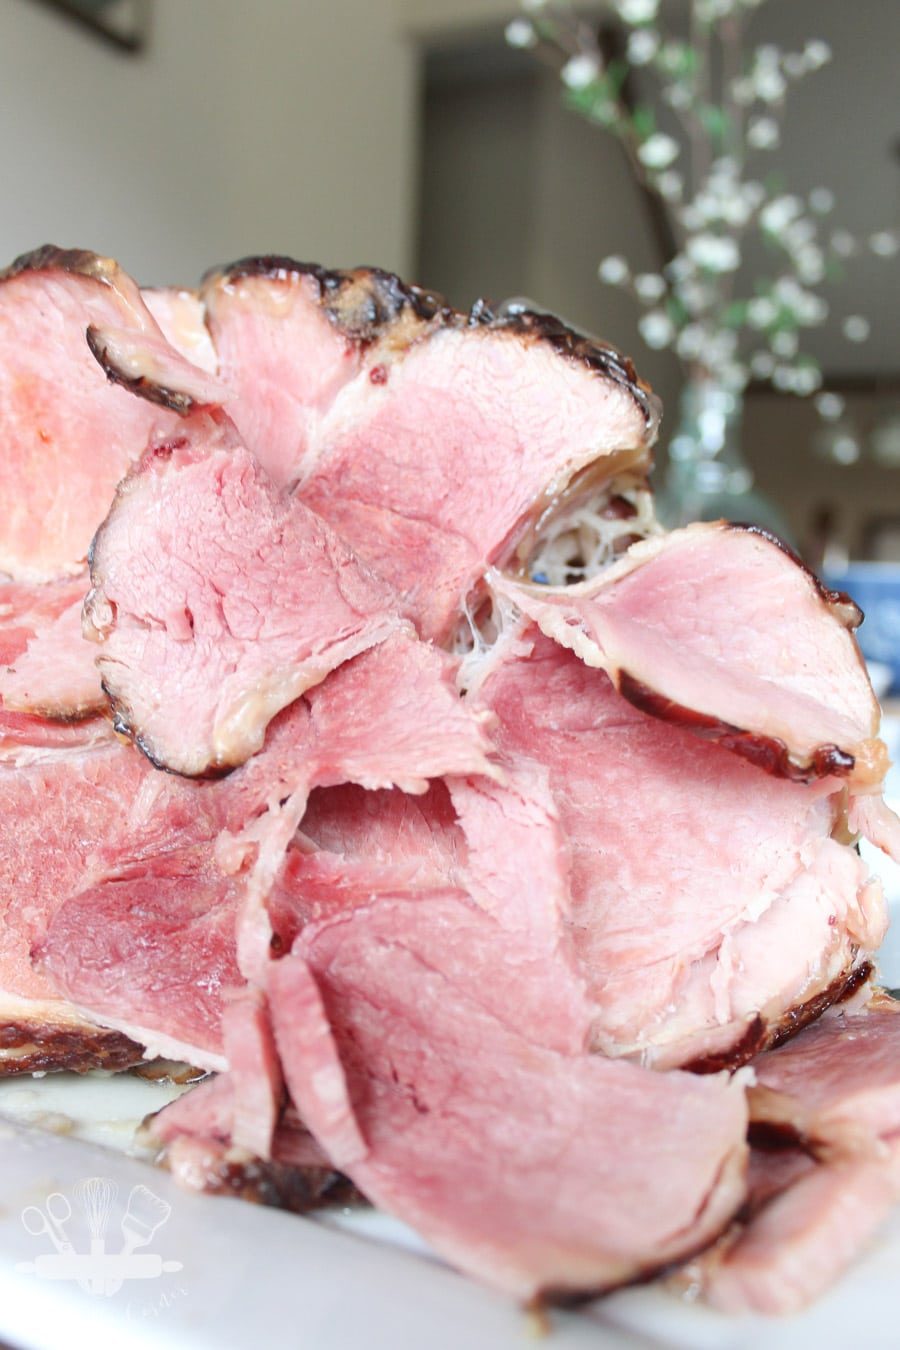 Beautifully cooked ham